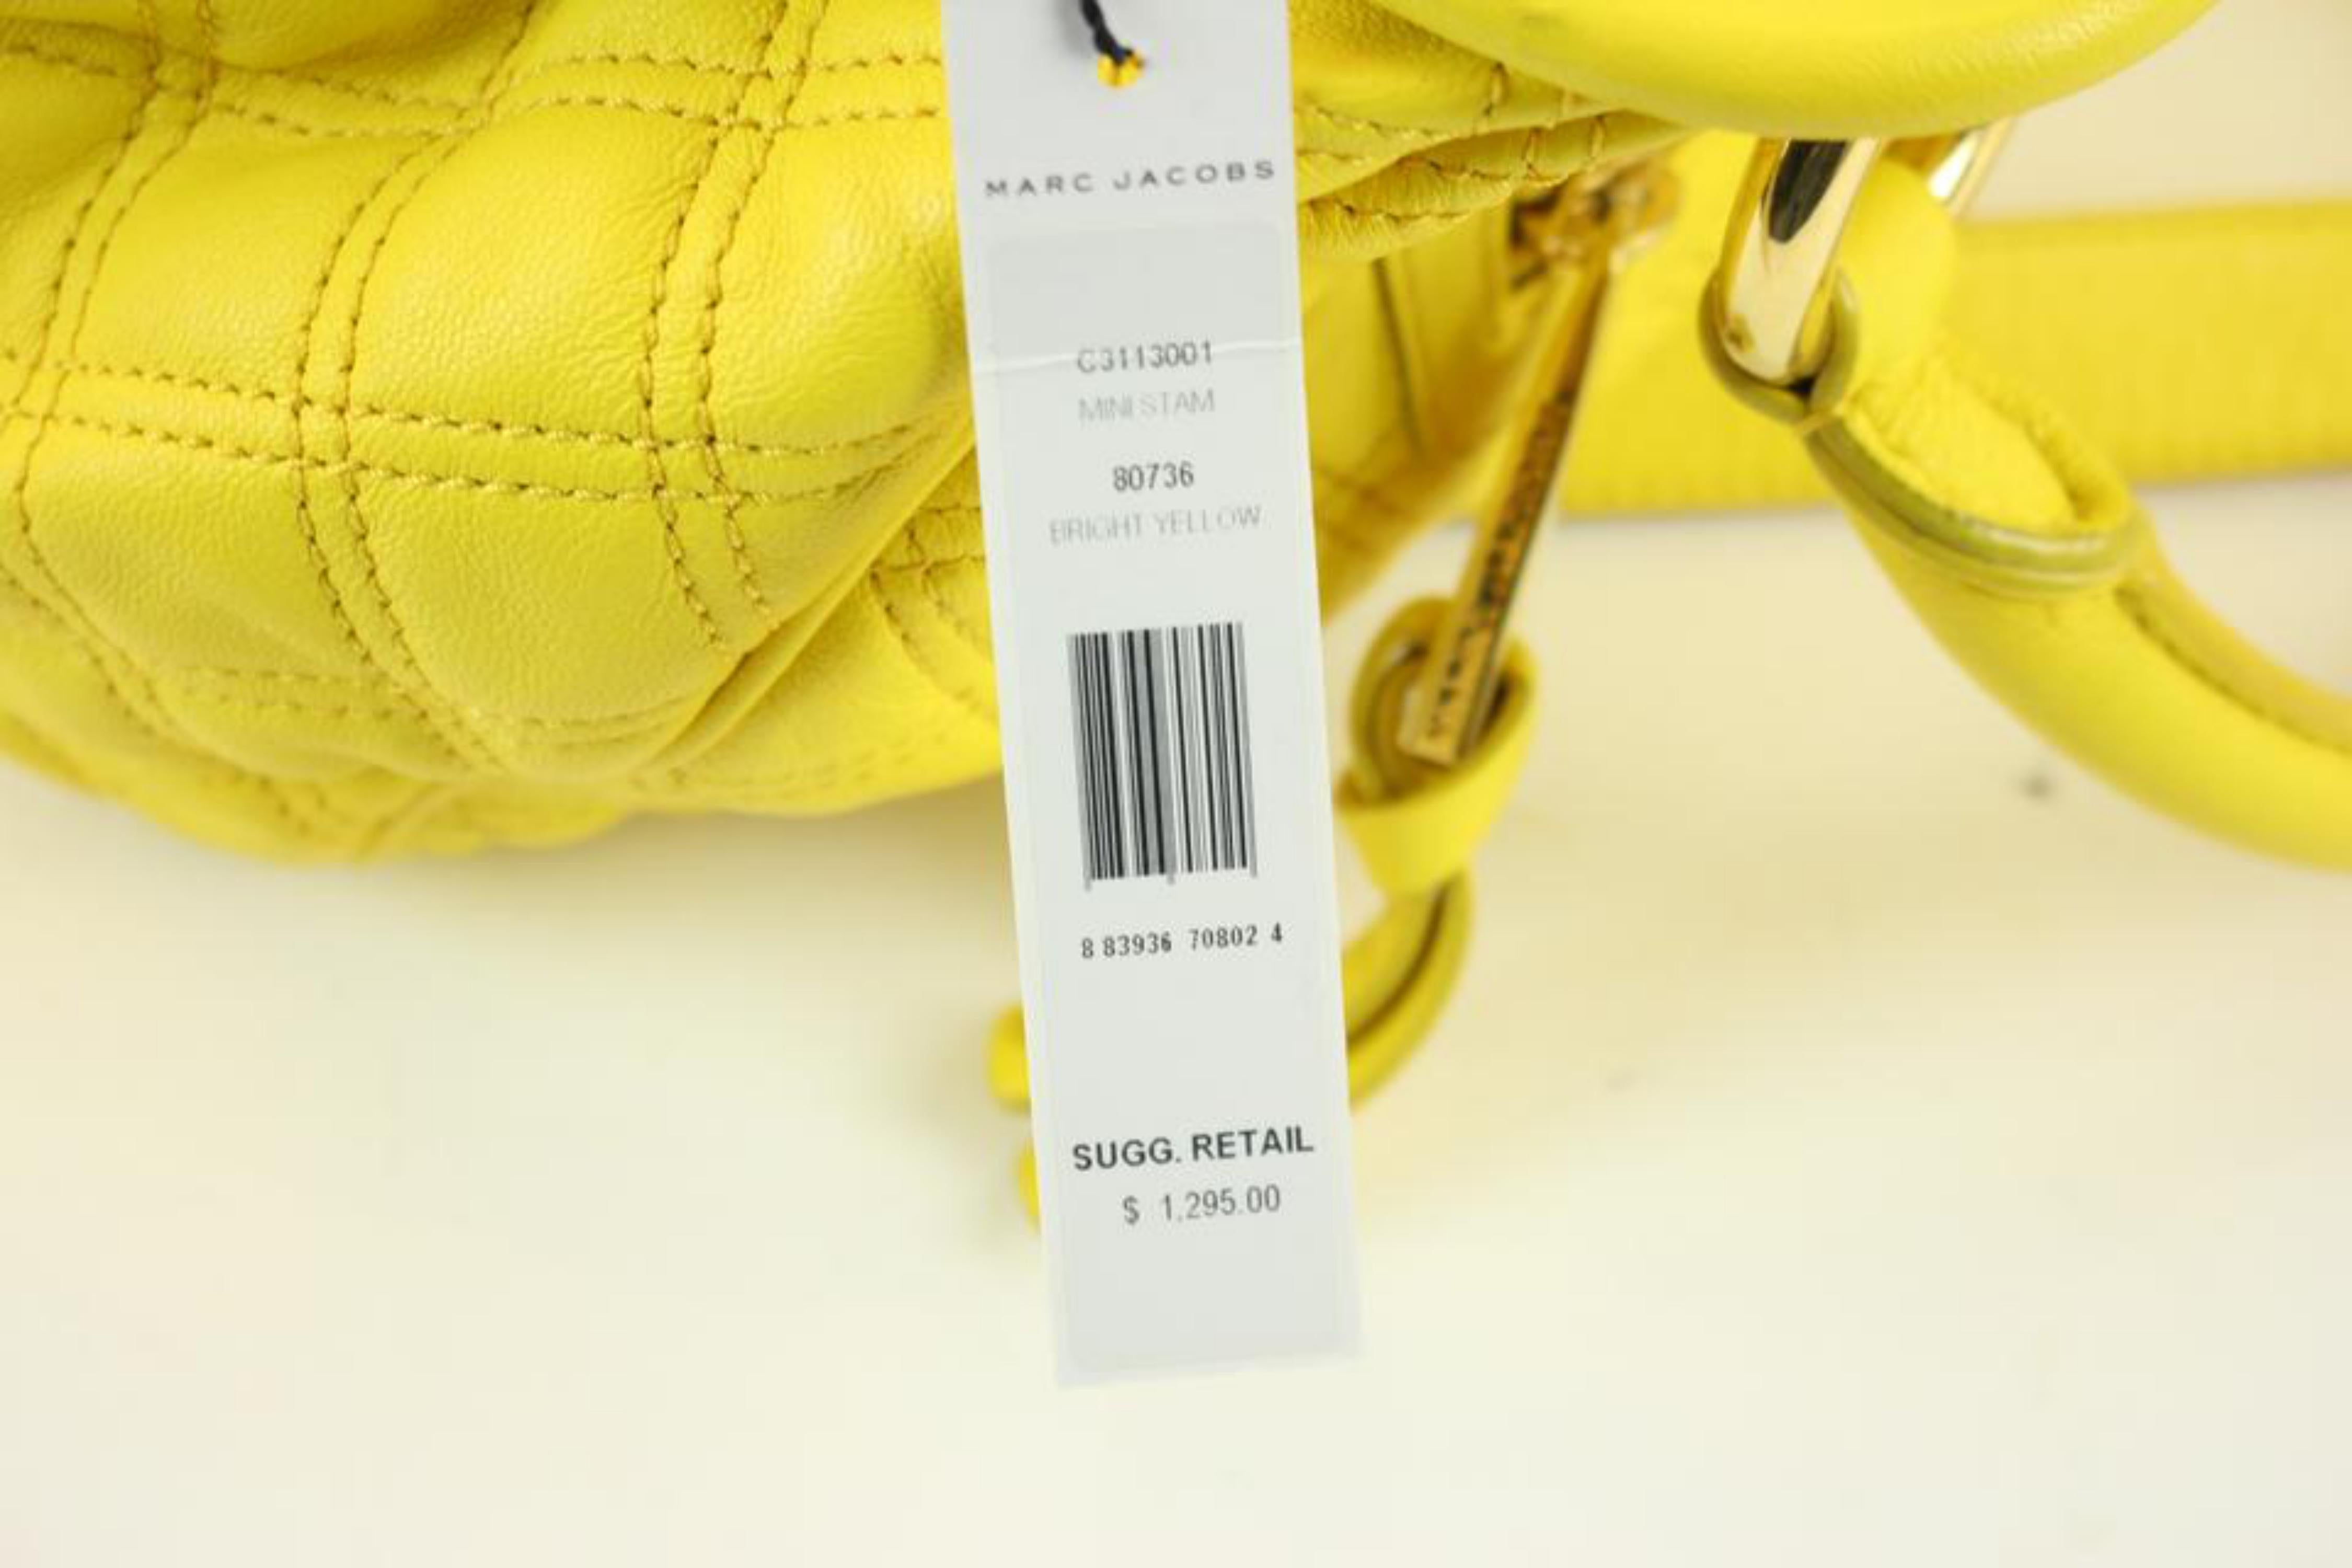 Marc Jacobs Quilted Stam 140mja1025 Yellow Shoulder Bag For Sale 2